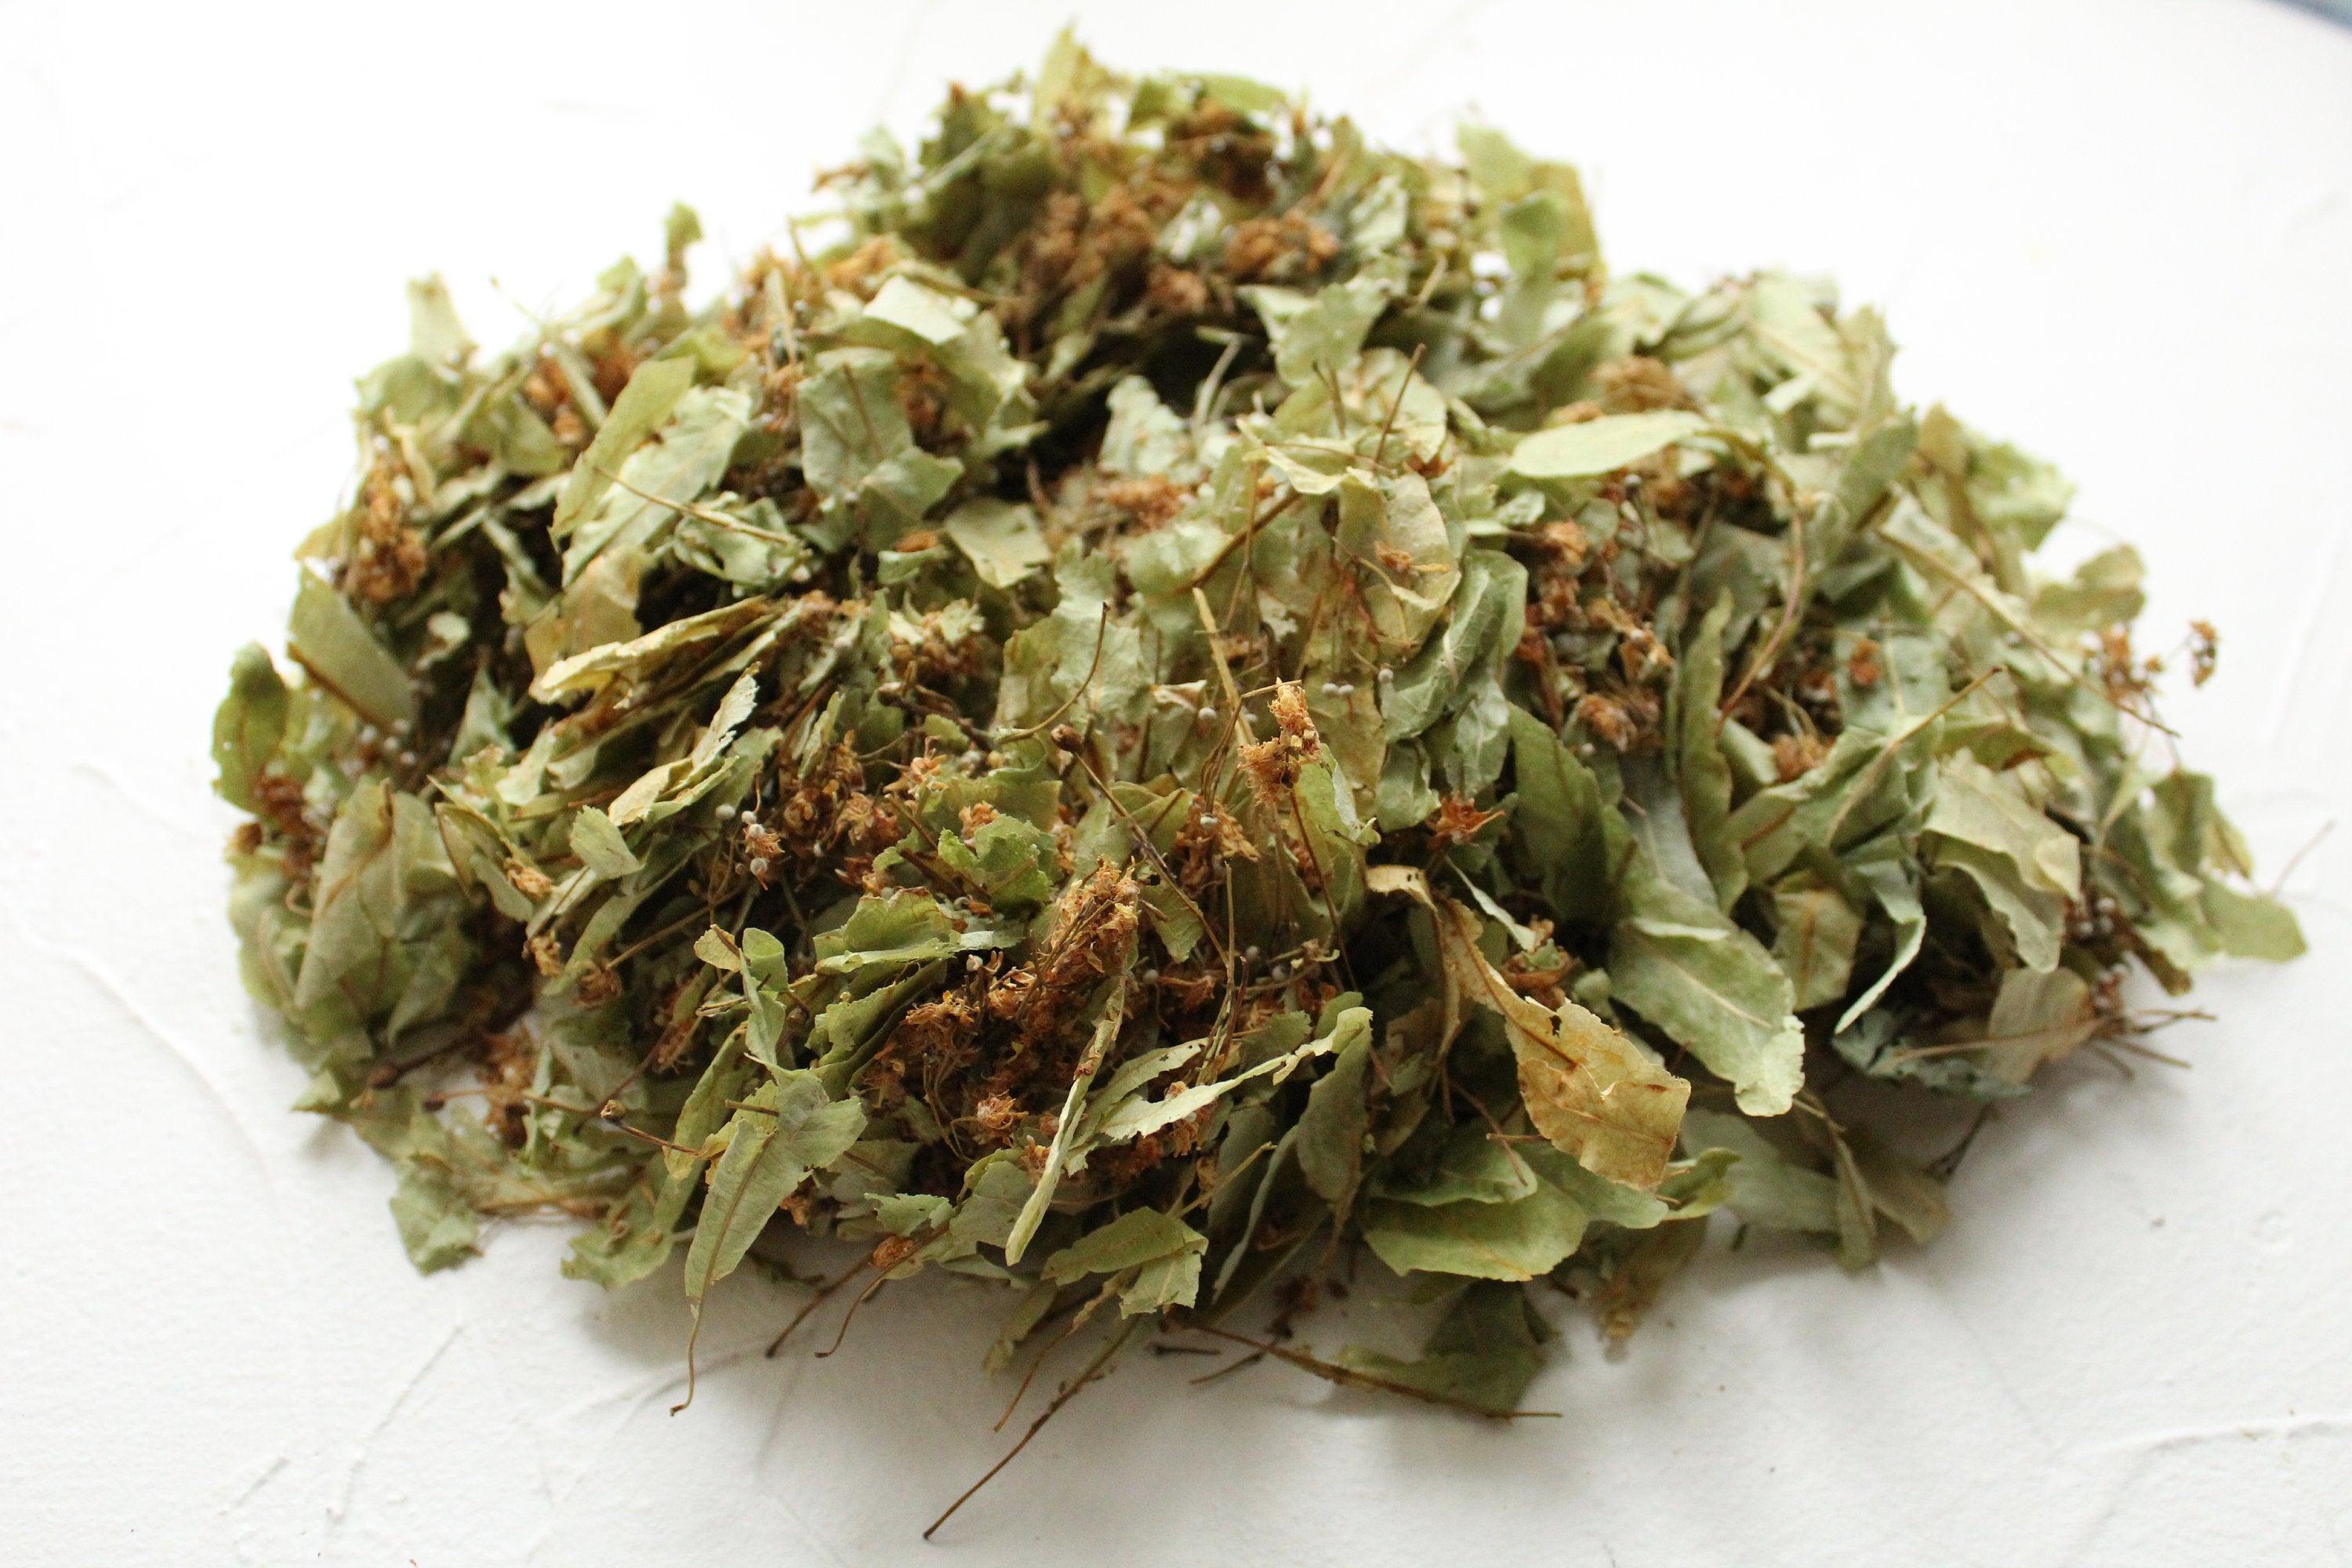 250 grams of Handpicked Linden flowers, Dried, Not cut, High Quality, Natural, Organic, Biodegraddable, Craft